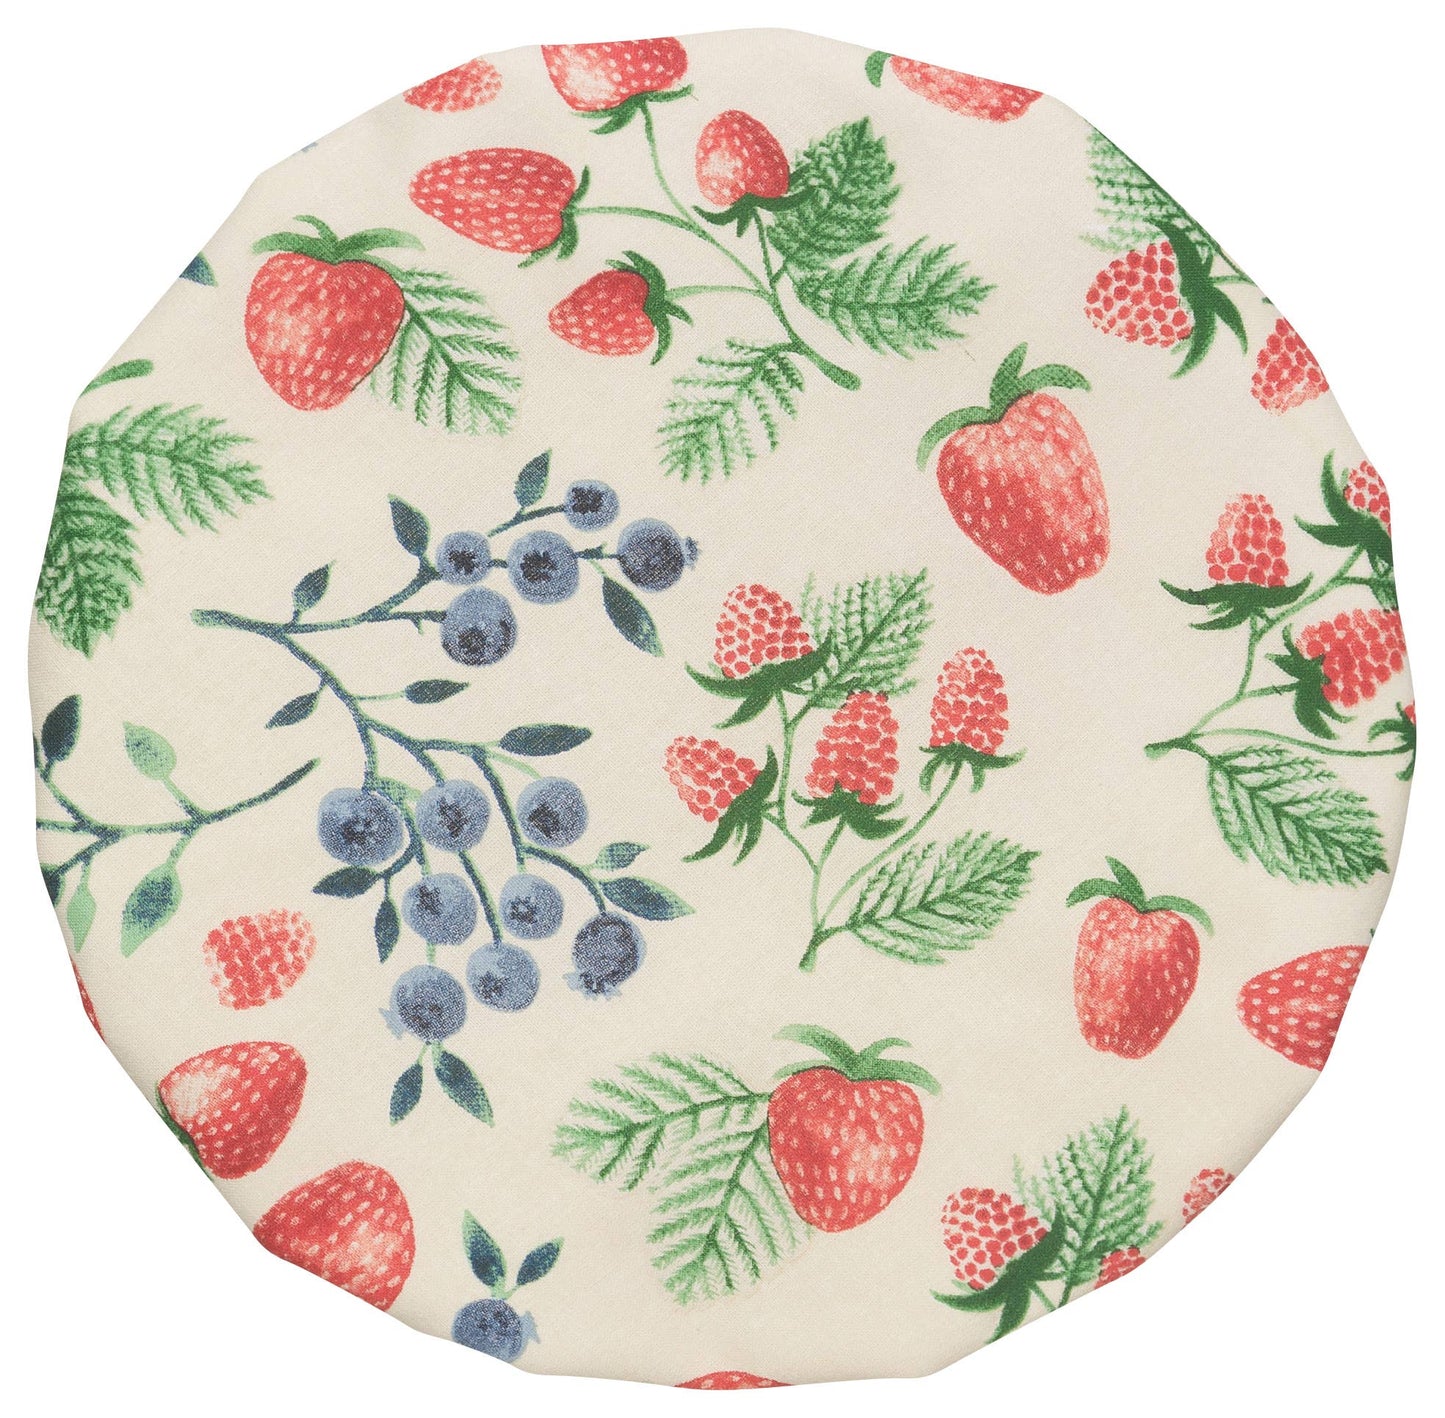 Berry Patch Bowl Covers Set